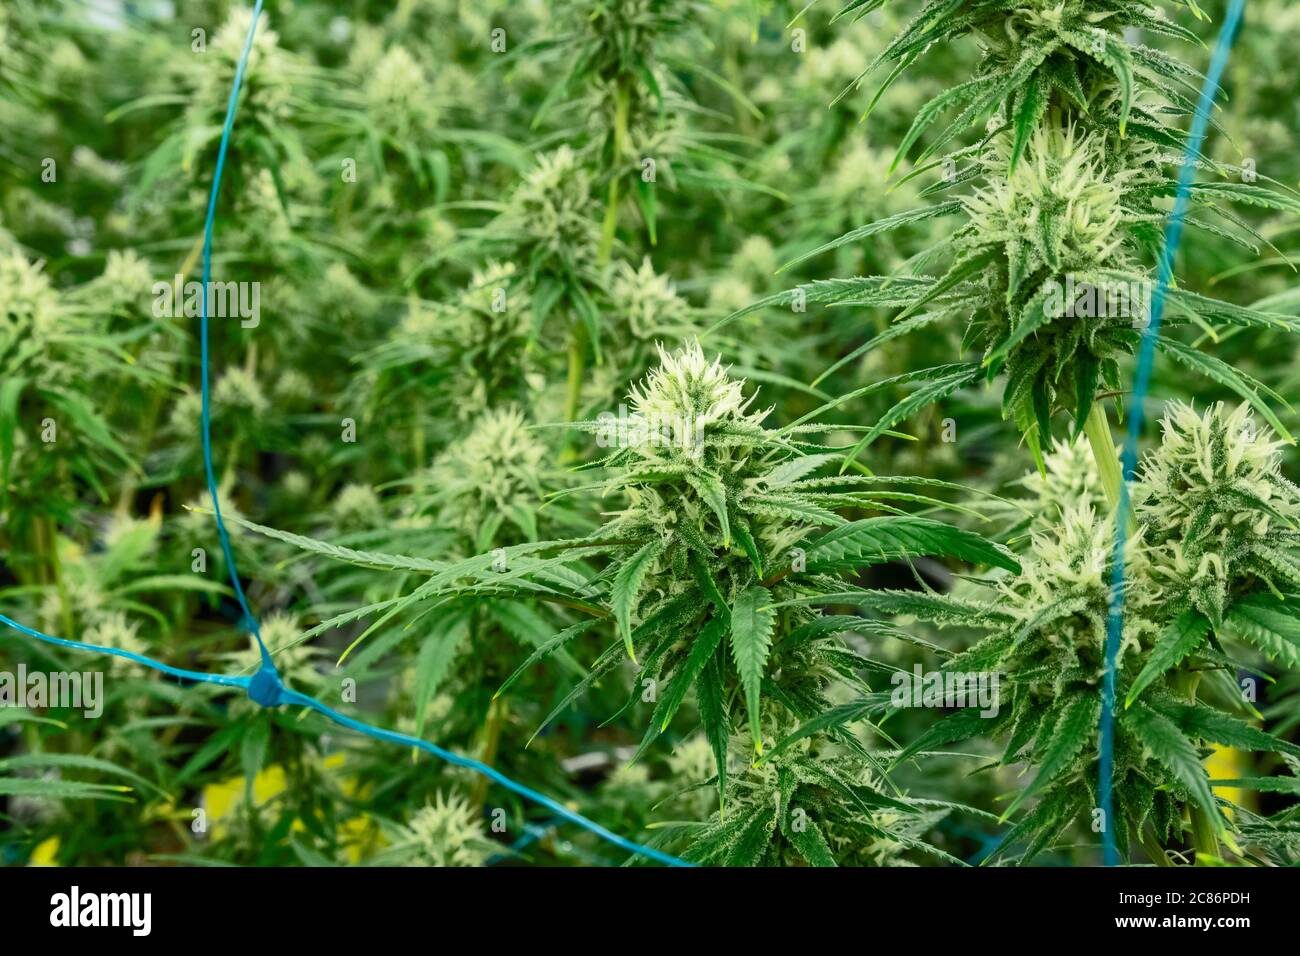 Detroit, Michigan - Cannabis growing at Viola Brands, a company founded by NBA veteran Al Harrington. Michigan residents voted to legalize medical mar Stock Photo